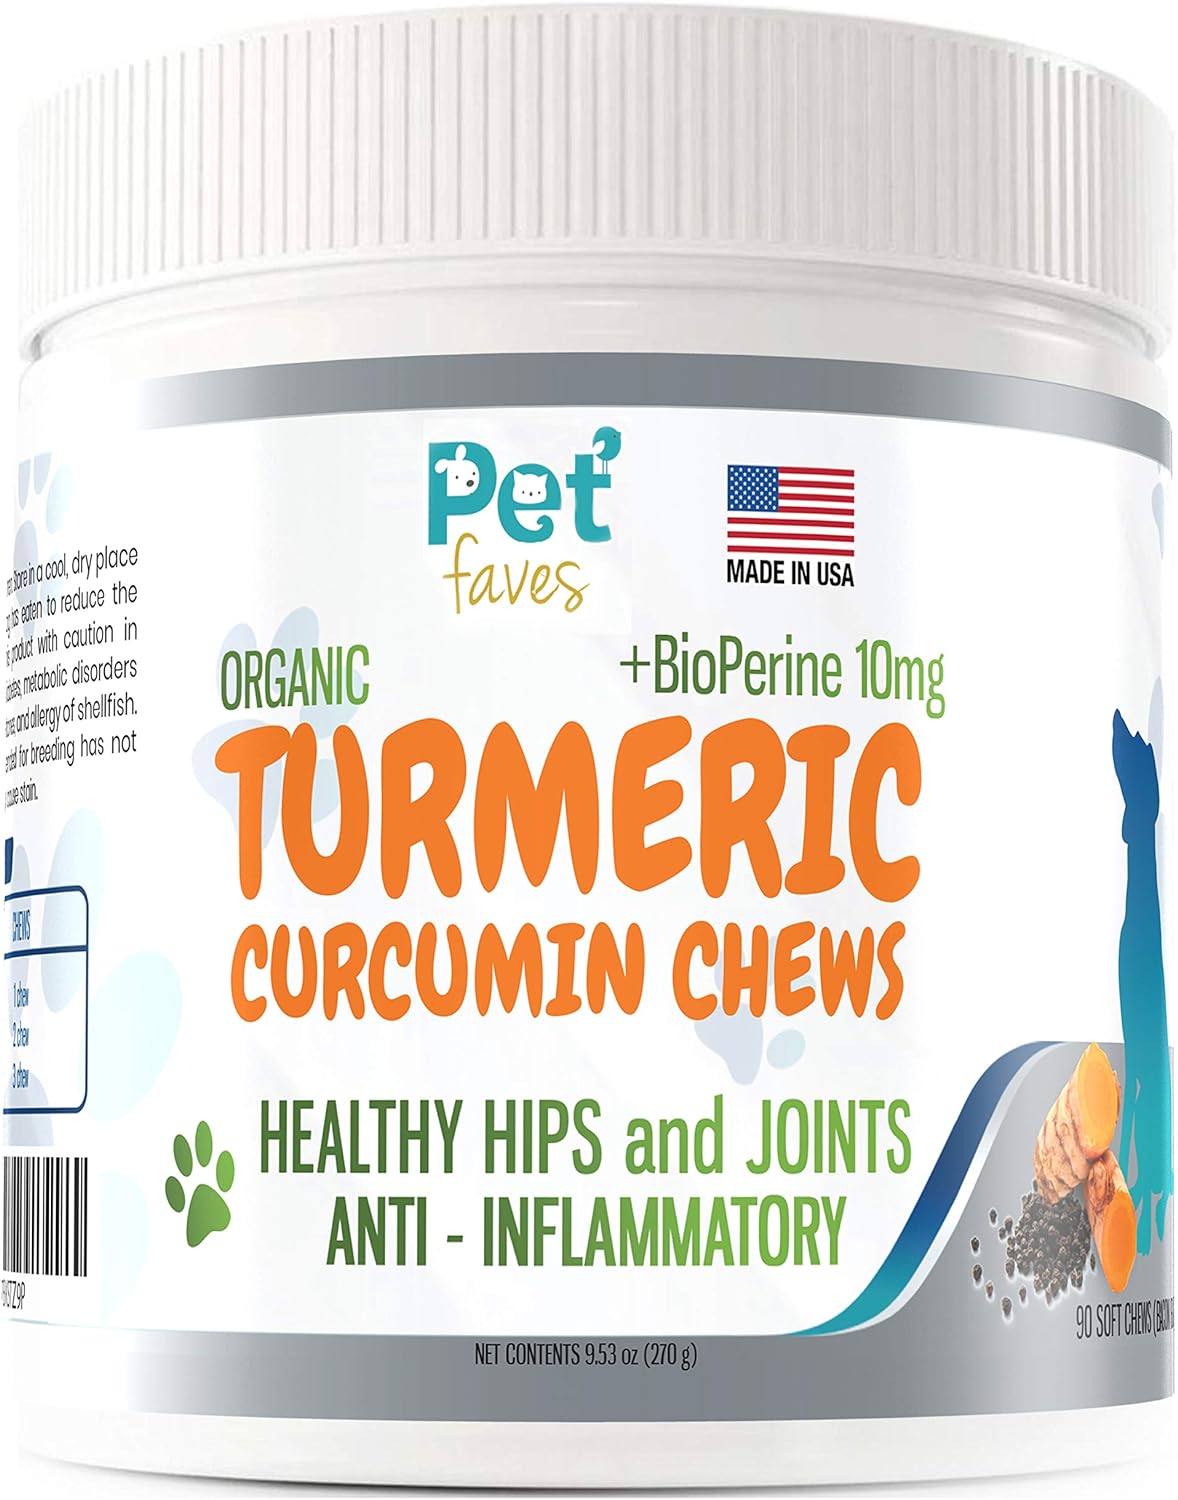 Natural Dog Hip & Joint Supplement for Dogs Arthritis Pain Relief. Turmeric Curcumin with Black Pepper for Anti Inflammatory. Tumeric MSM Glucosamine Chondroitin for Dogs Healthy Joints - 90 Chews